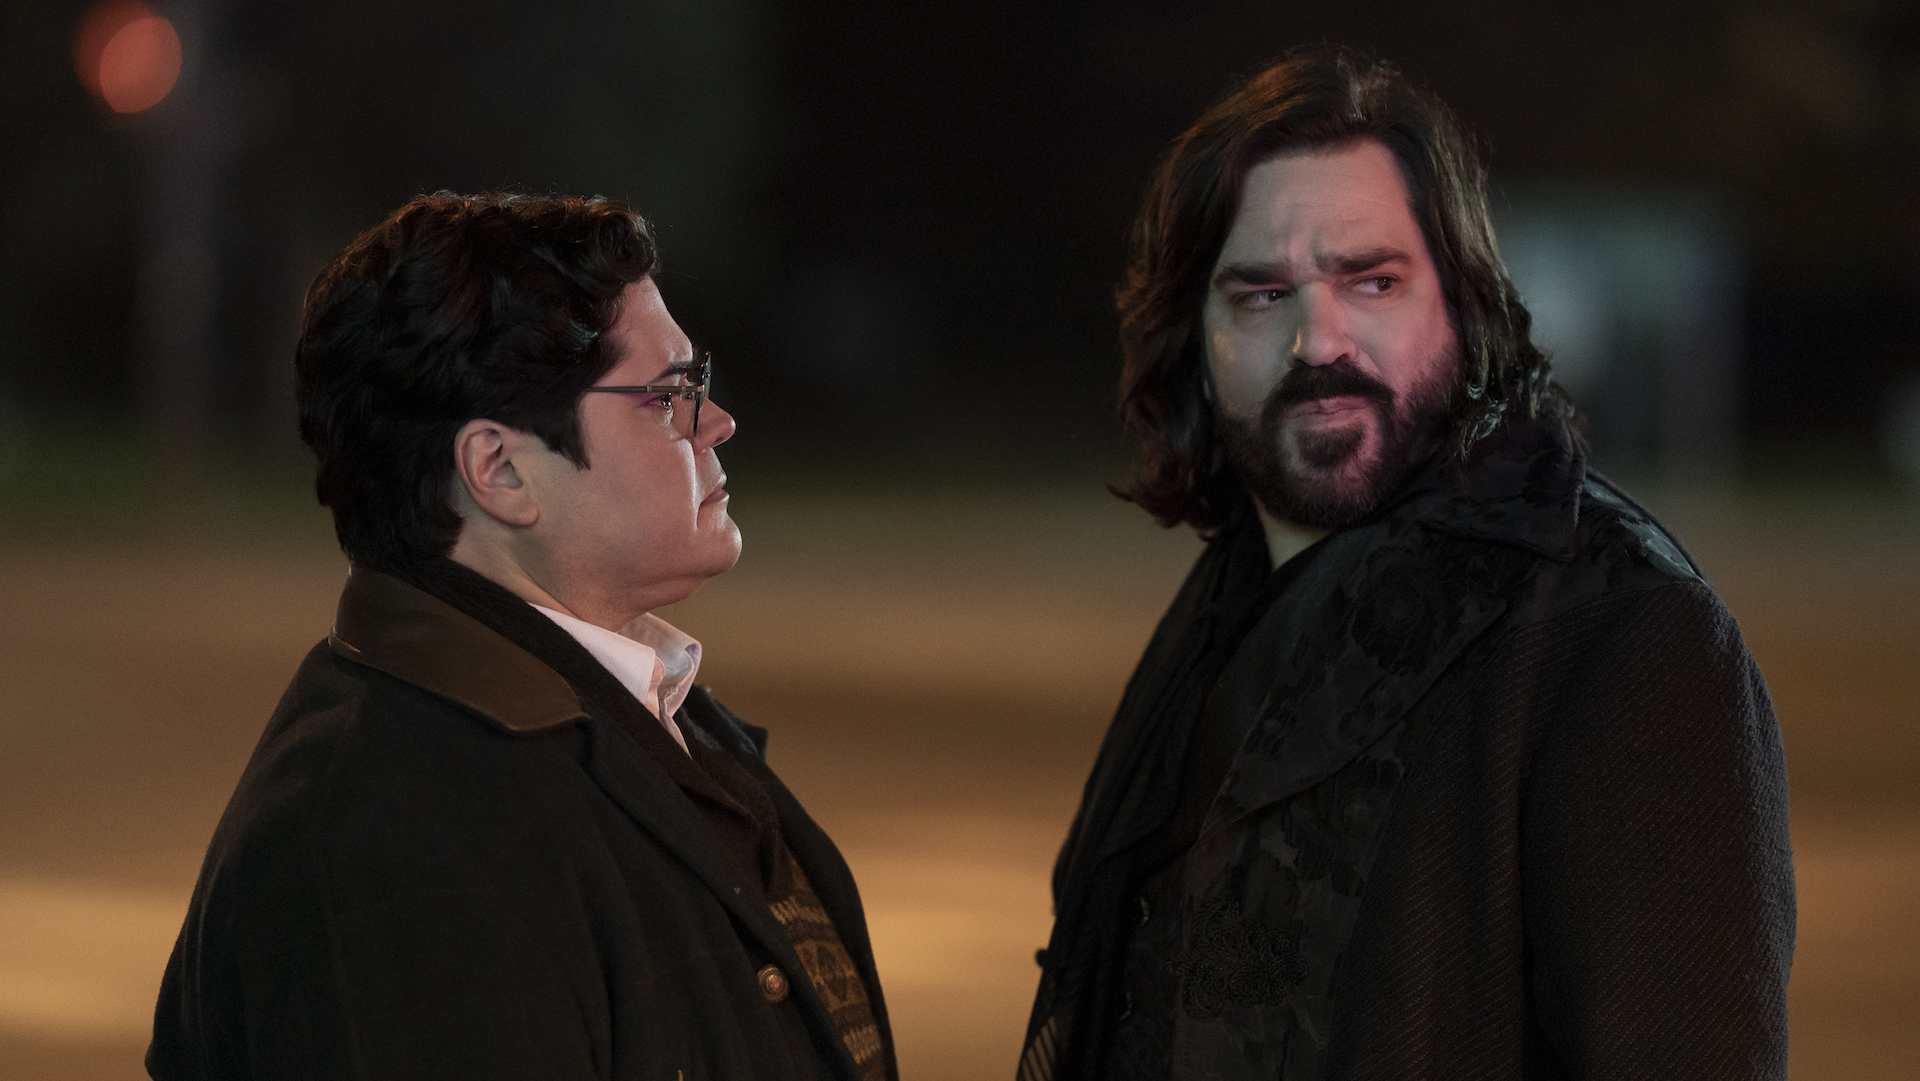 Medium shot of two men, one with glasses and the other with shoulder-length hair and a beard, speaking shadily at night; still from "What We Do in the Shadows"